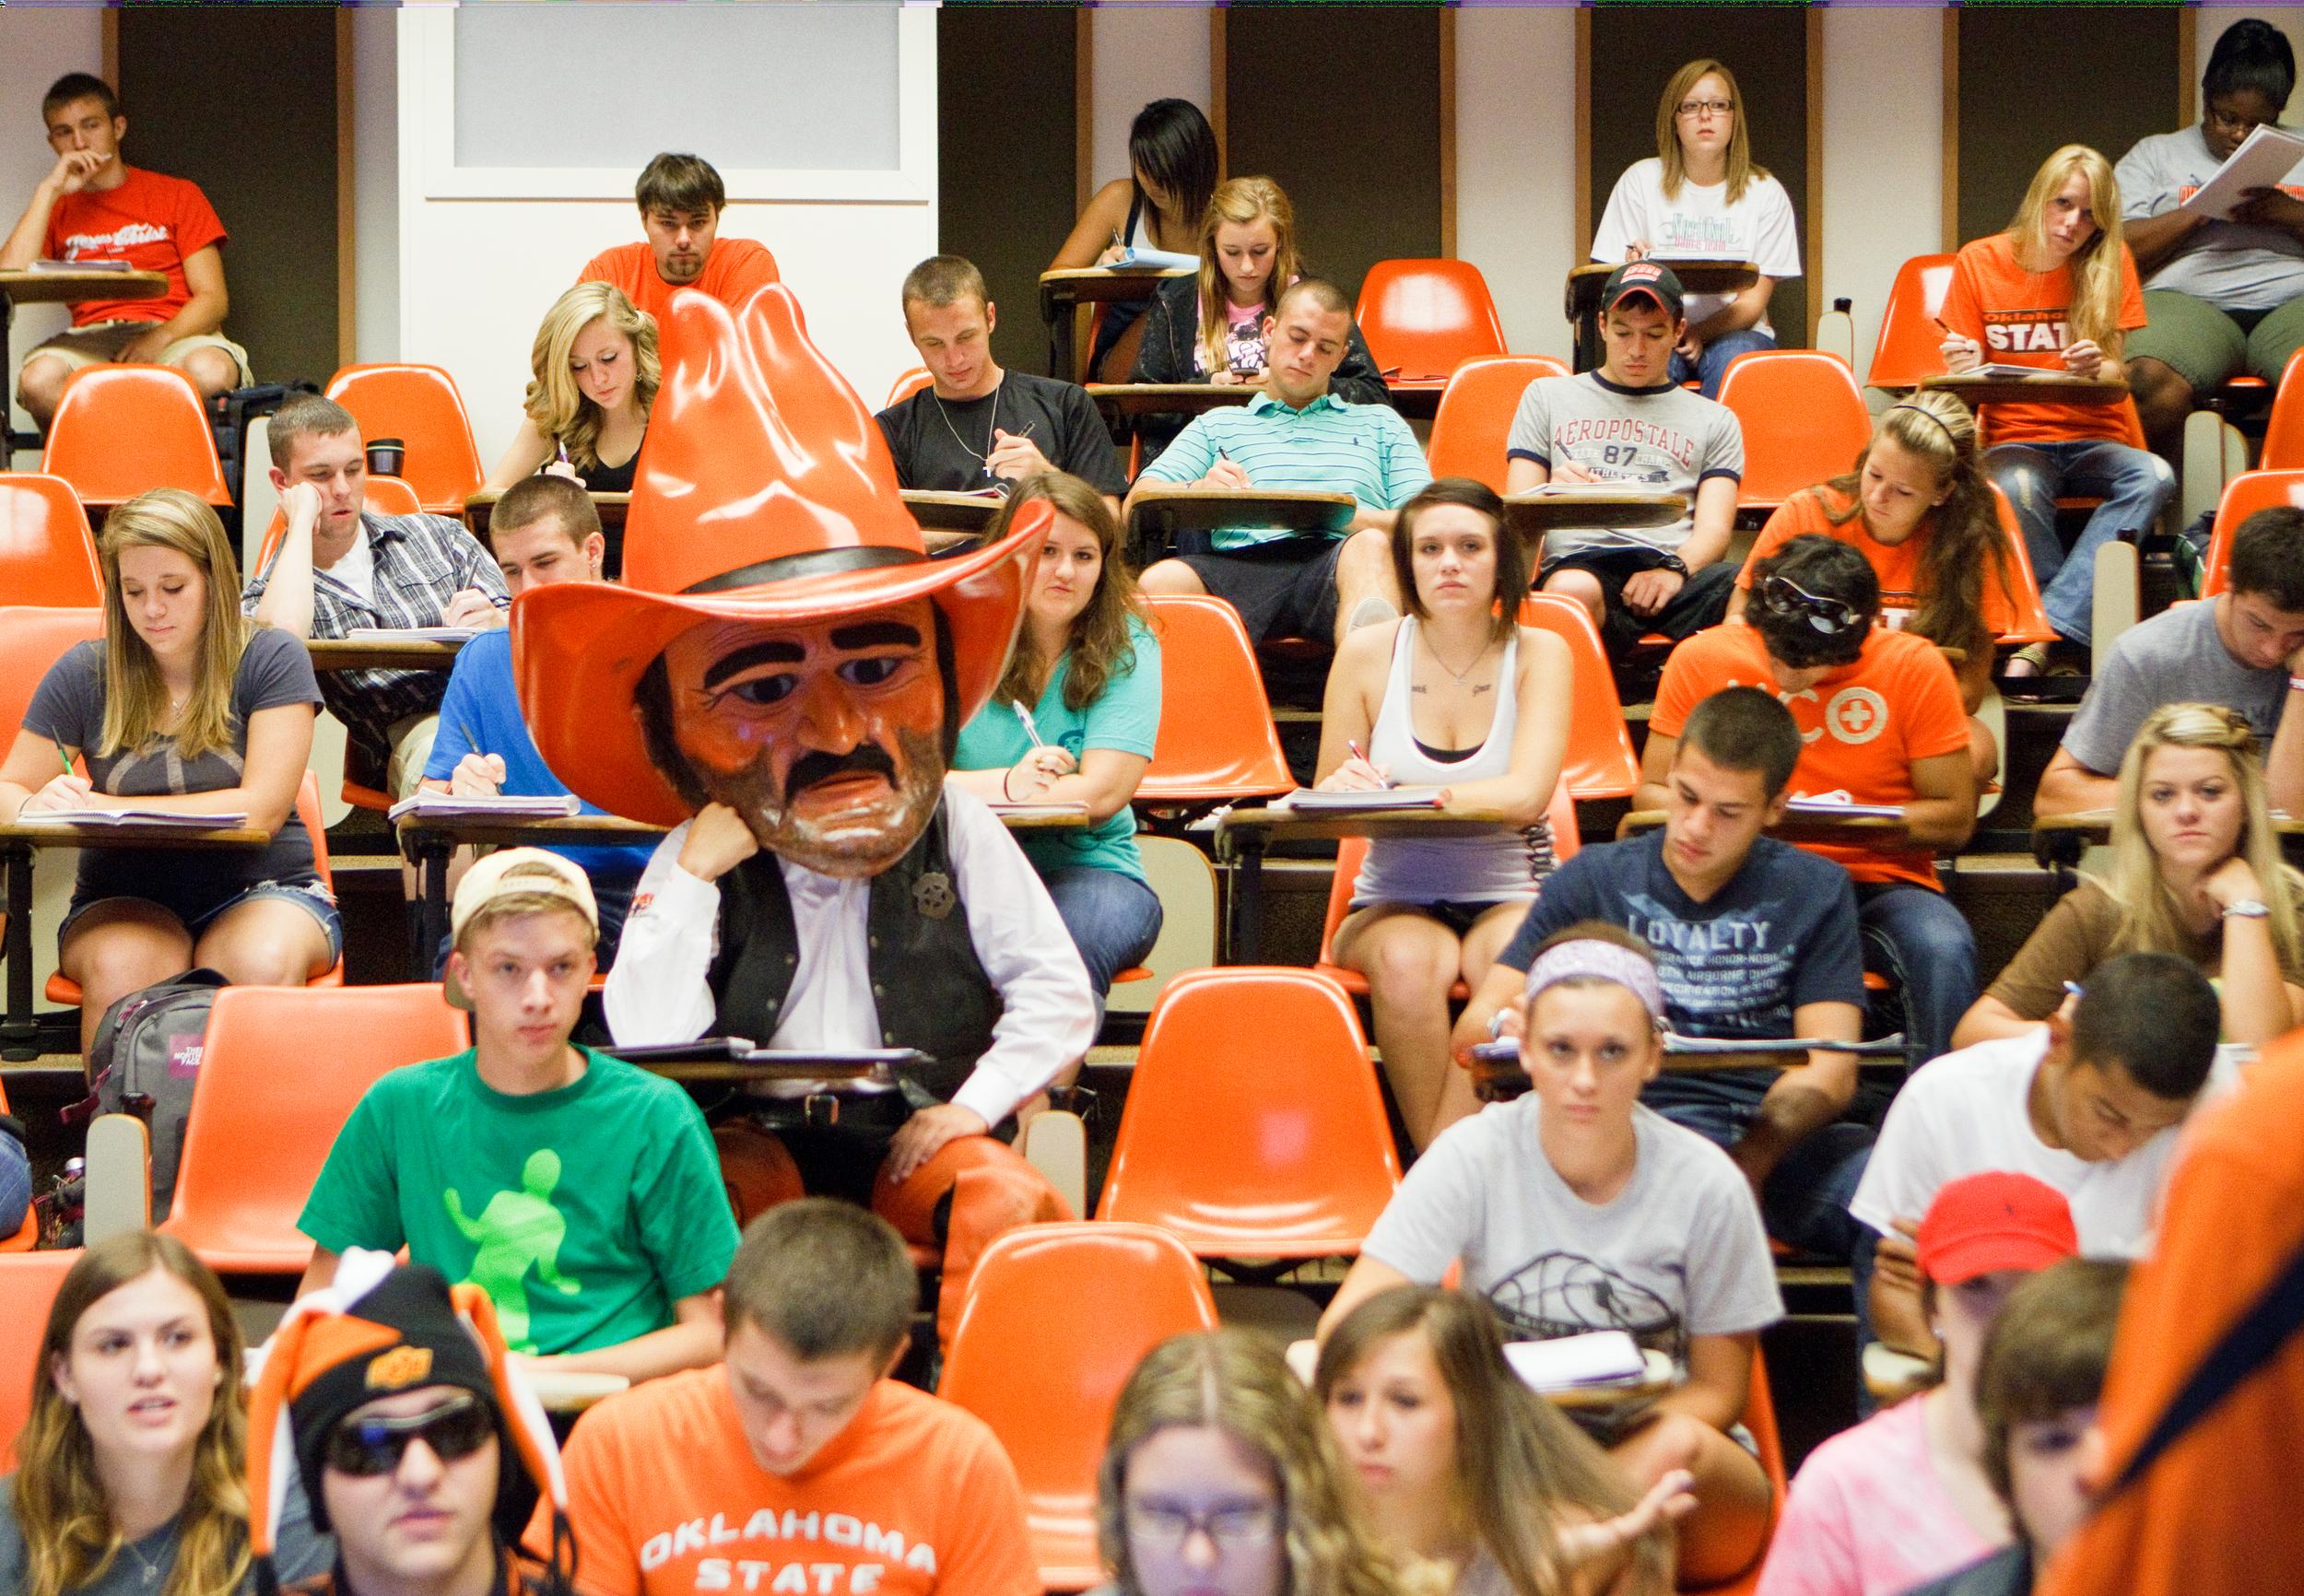 A classroom full of students, including Pistol Pete, who is resting his hand on his chin while listening